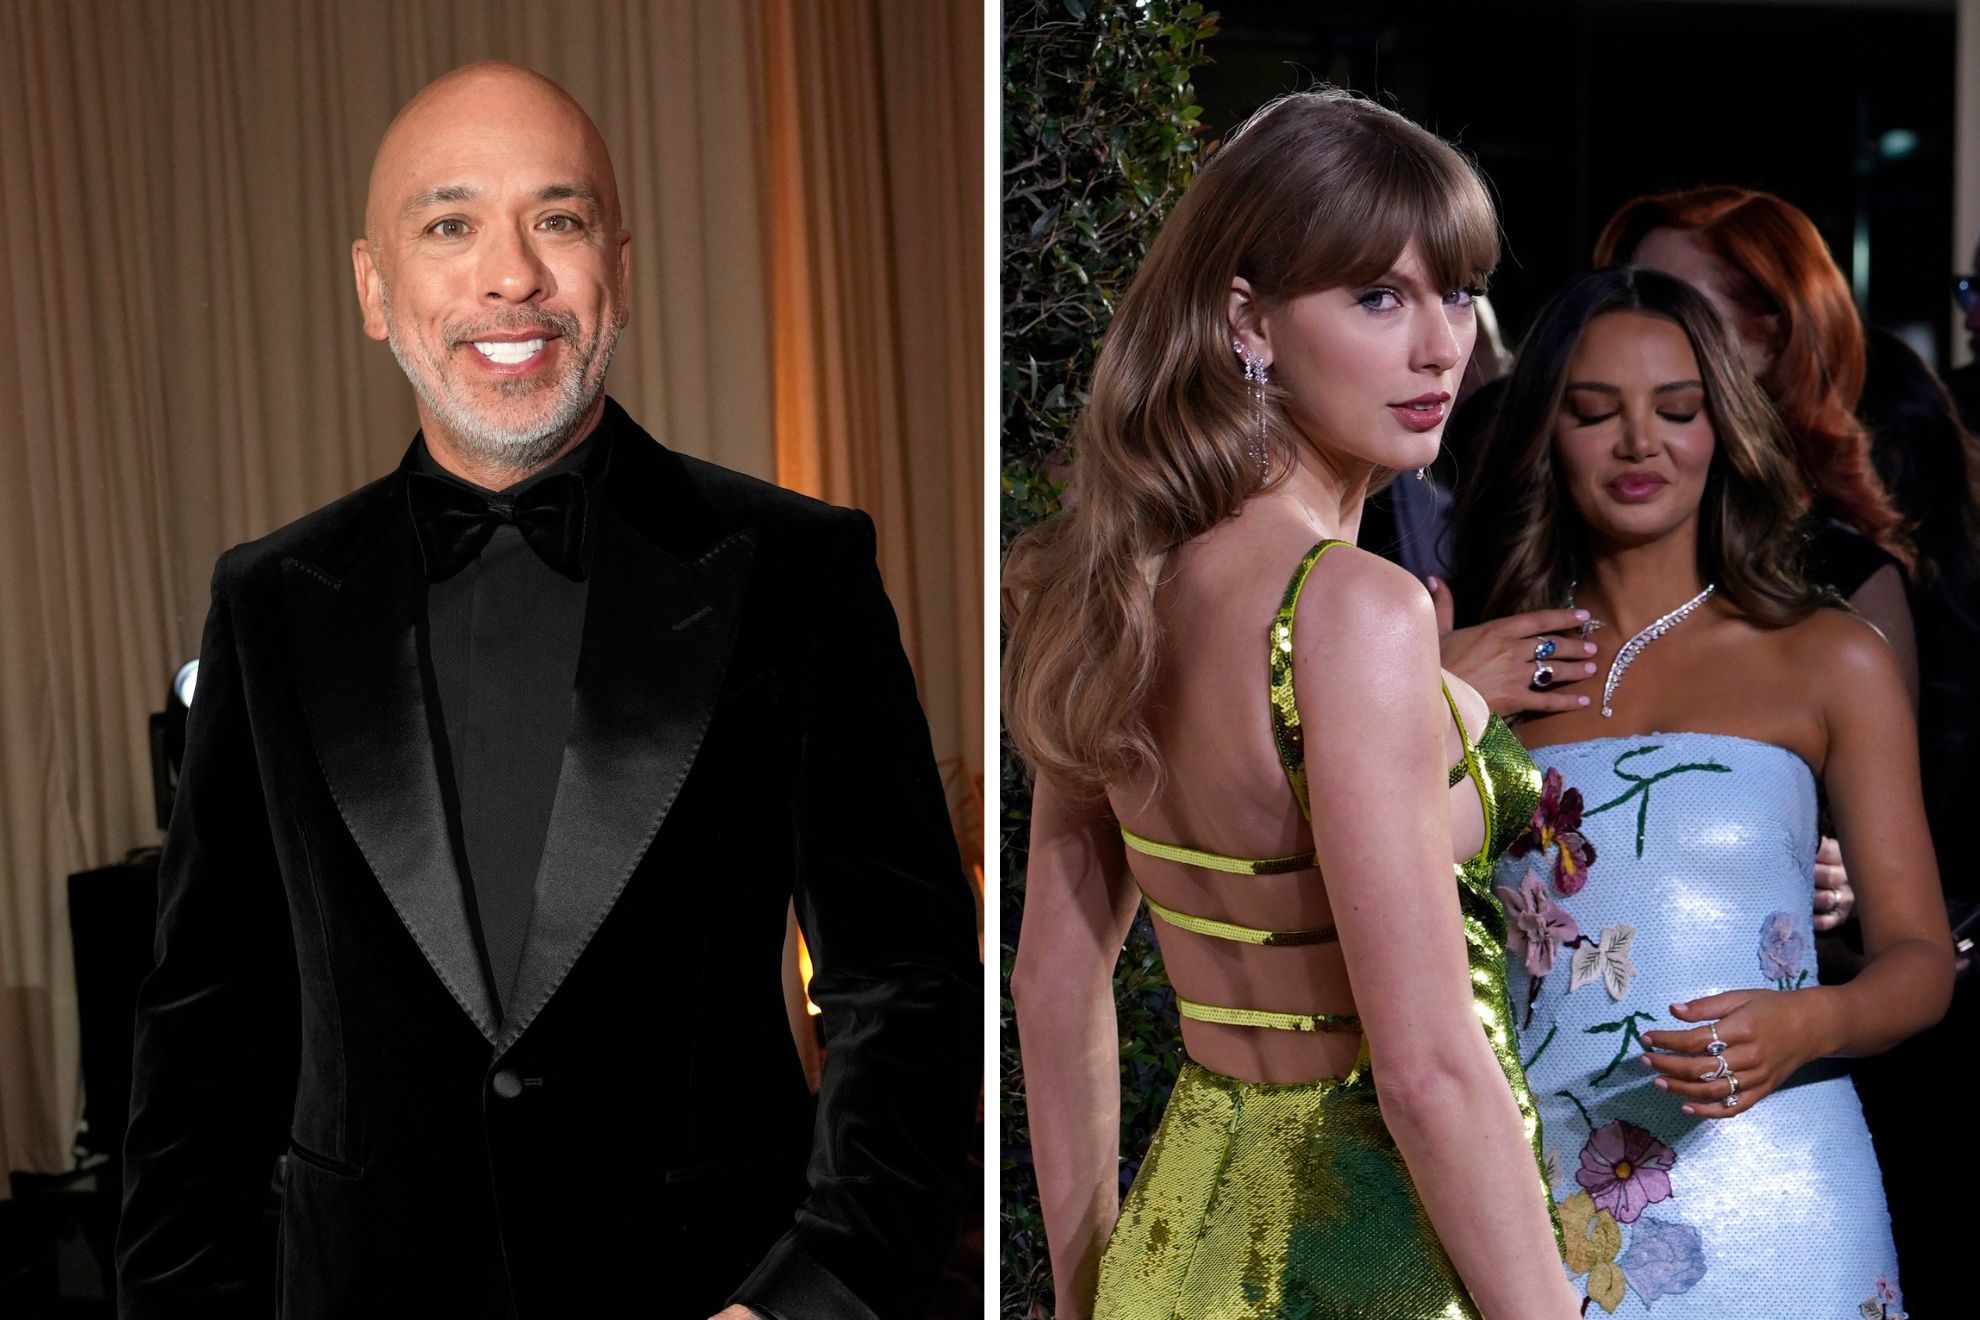 Jo Koy cant stop talking about Taylor Swift, who shows love for Beyonce in NYC